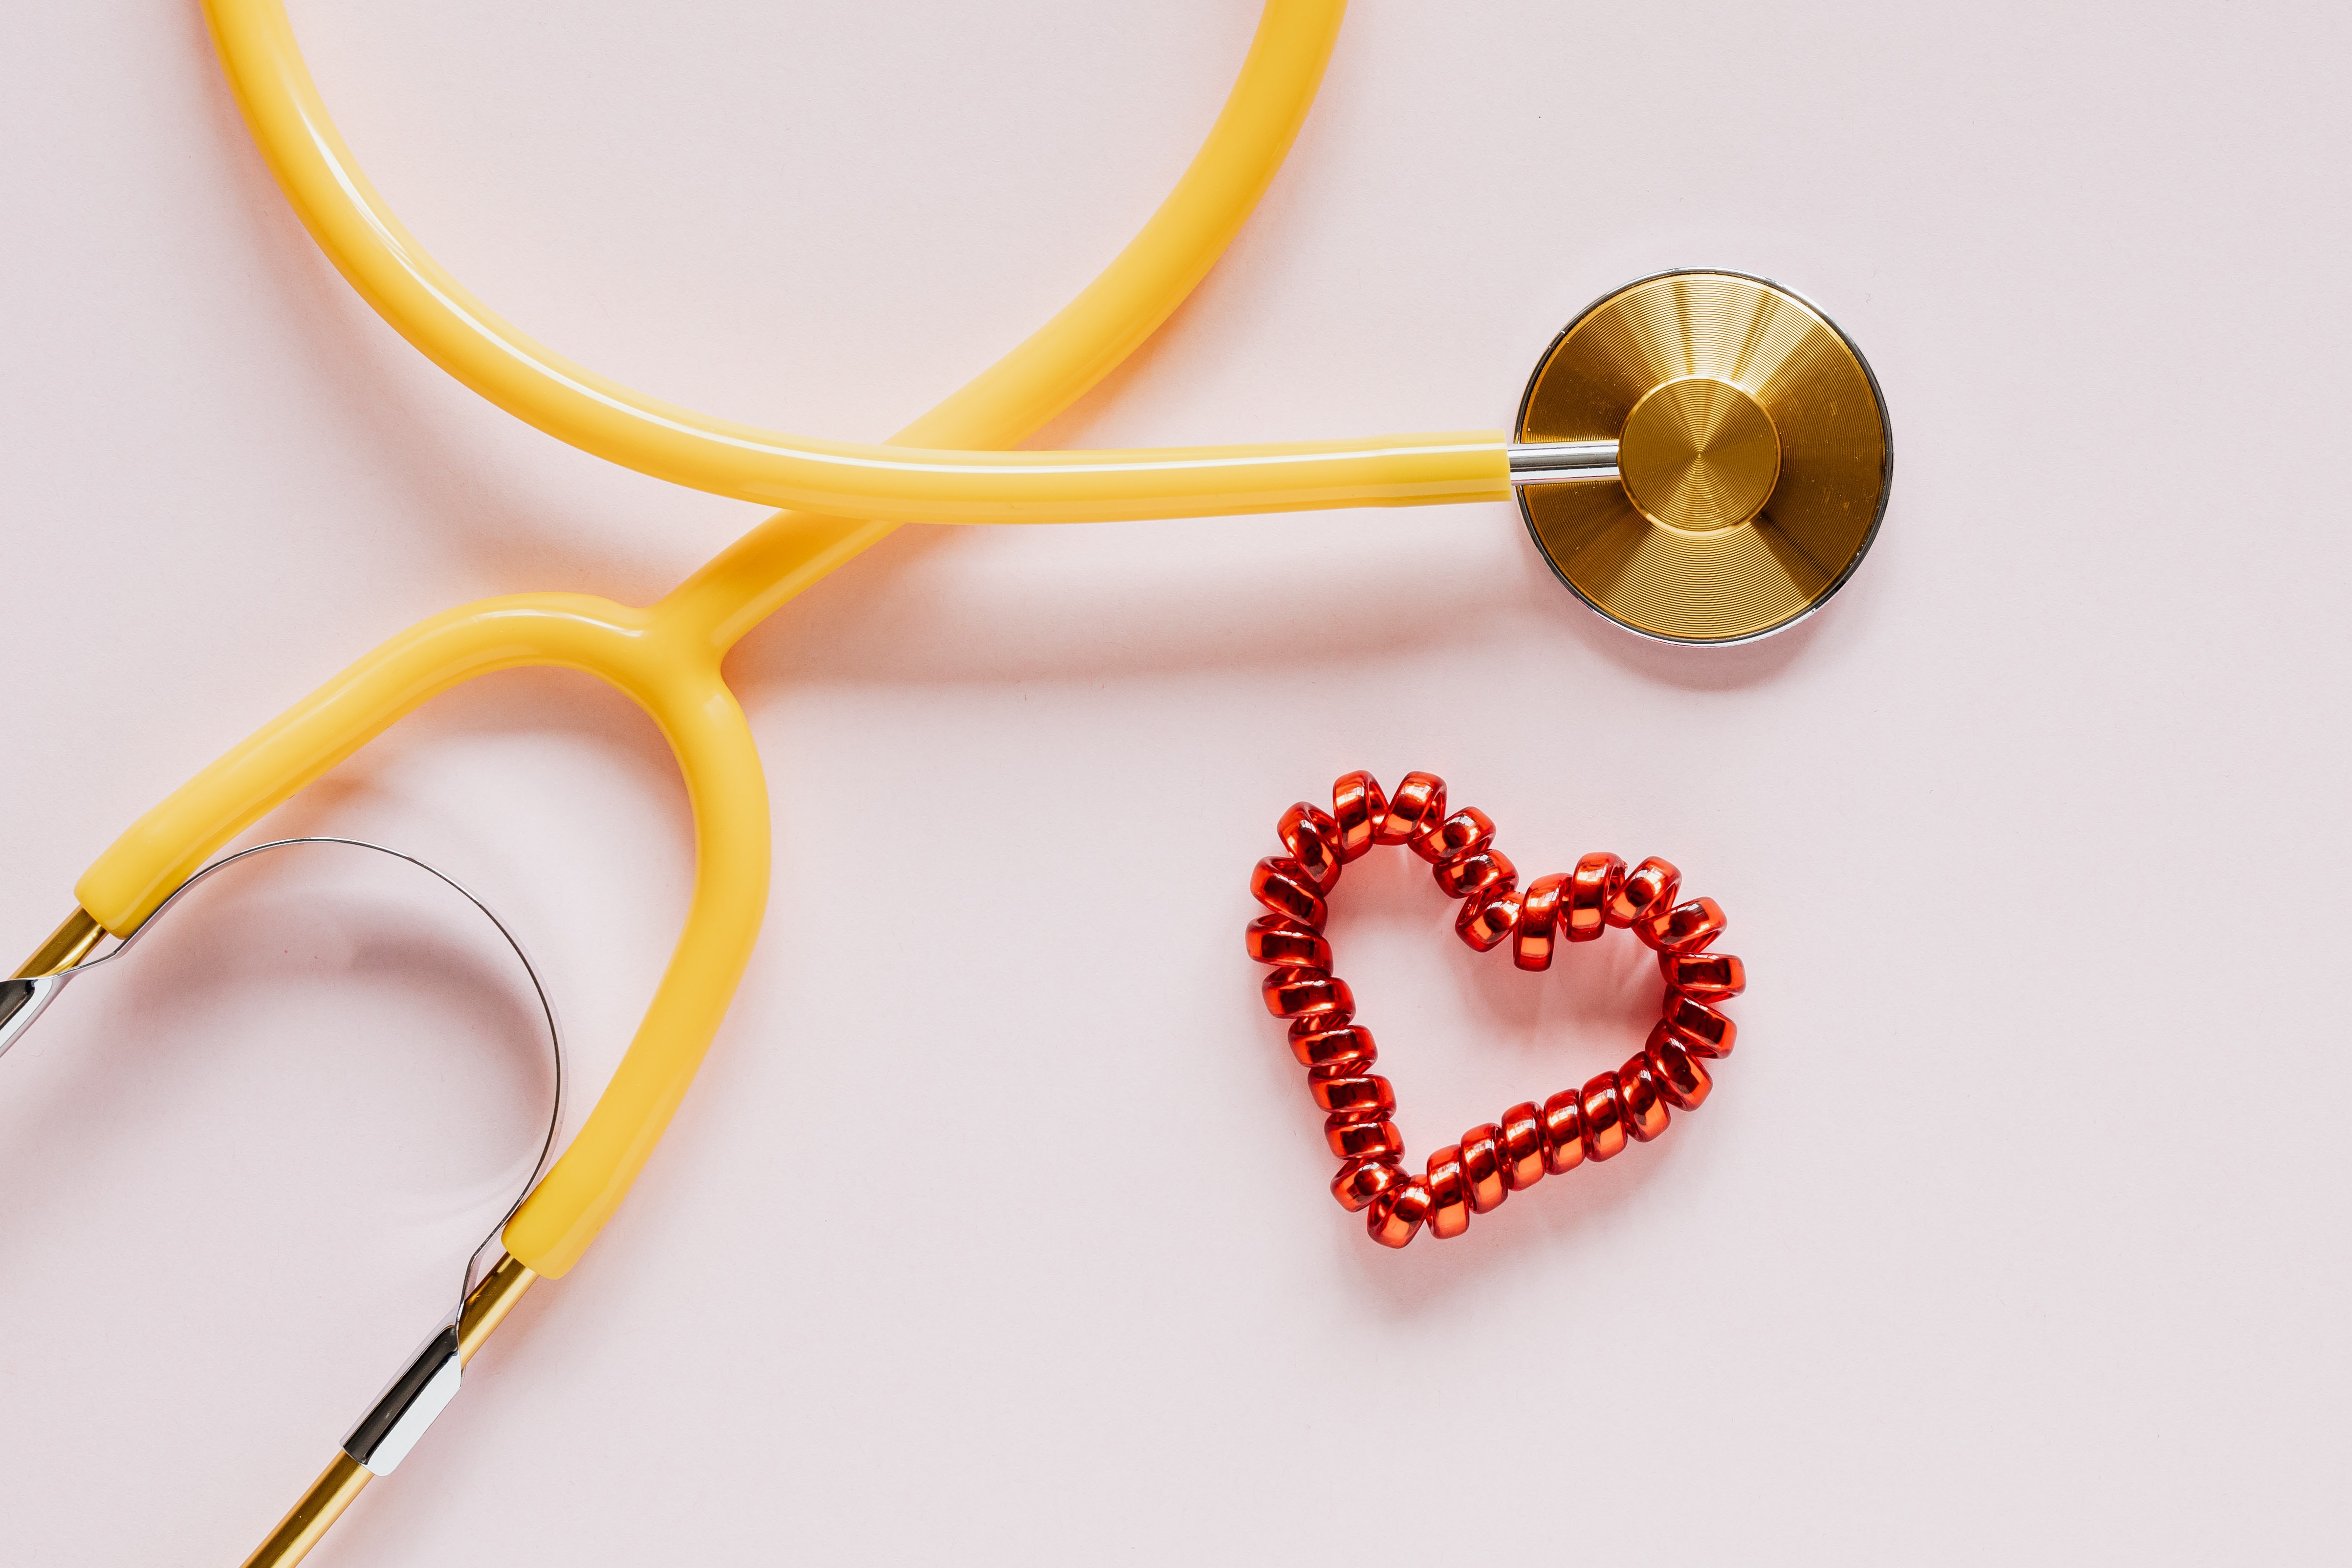 a stethoscope with a heart next to it